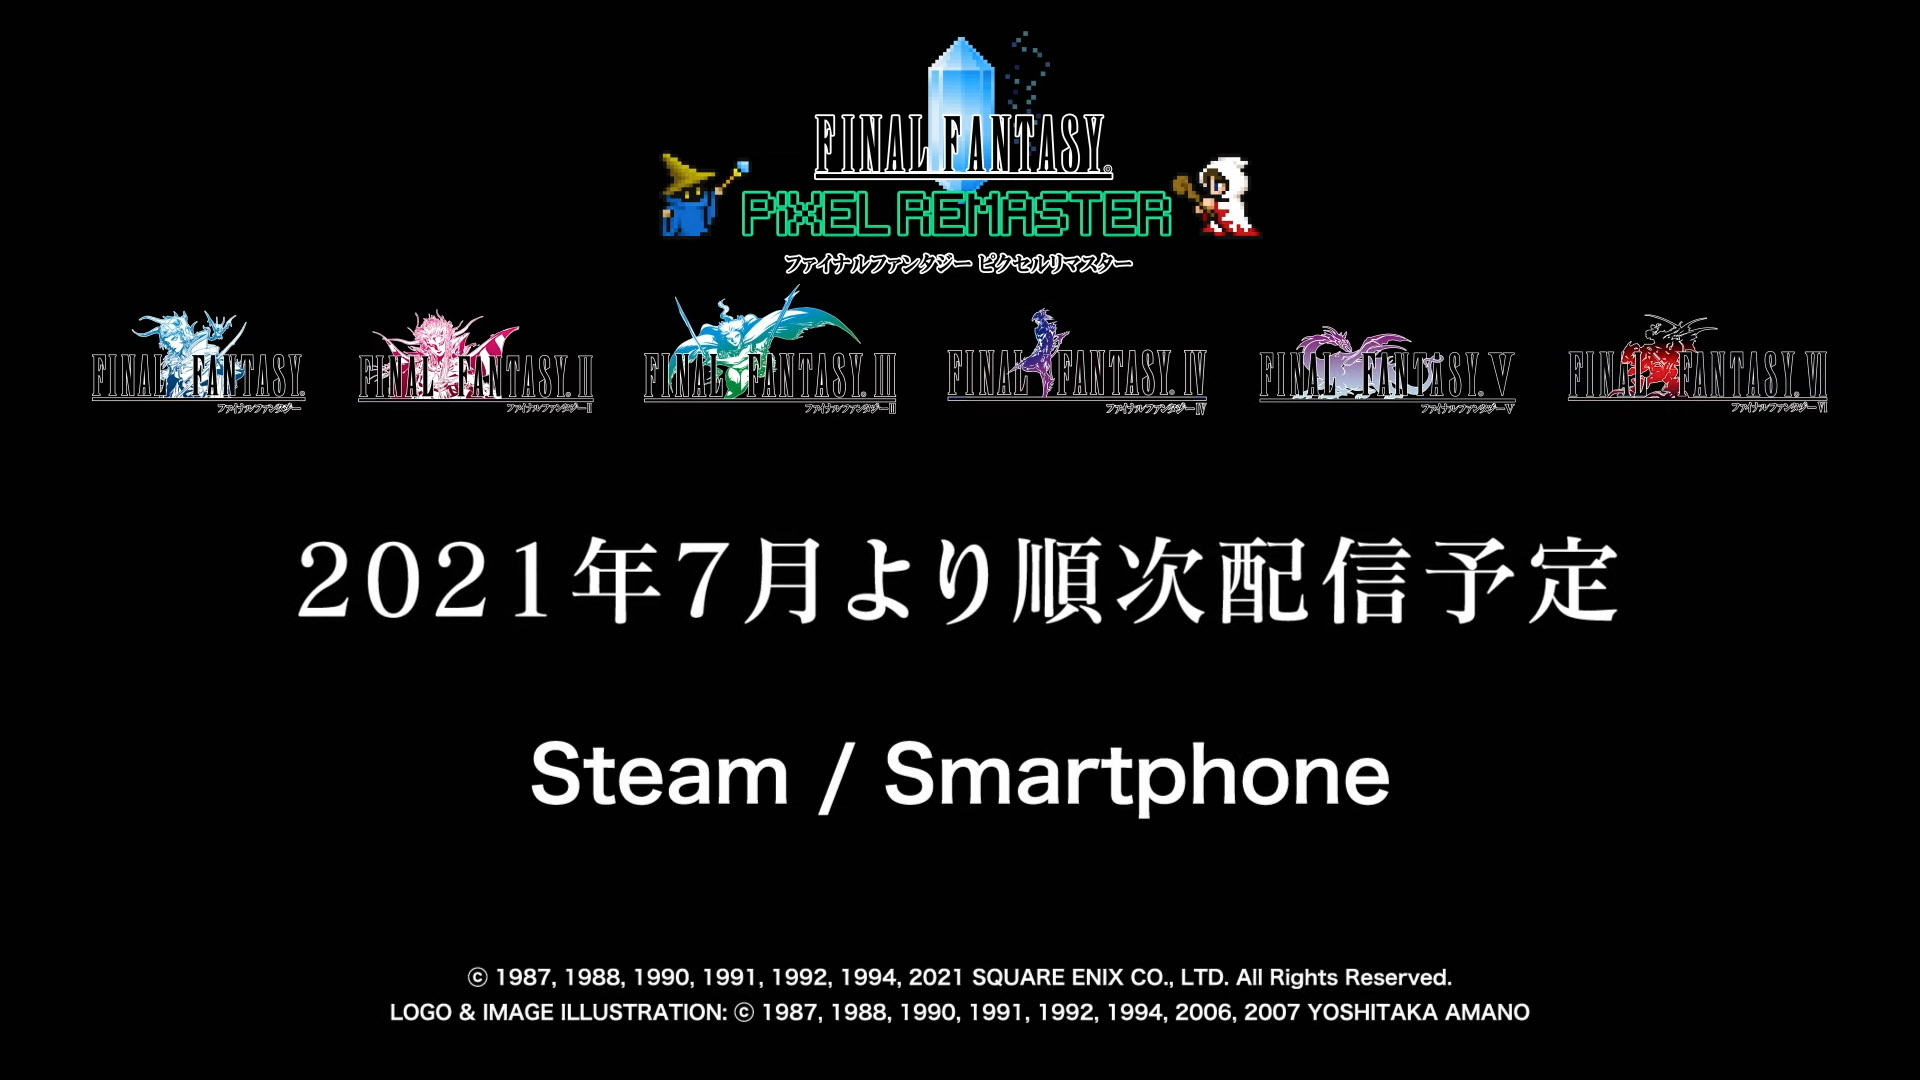 Final Fantasy VI: Pixel Remaster – Now Available for Android and iOS